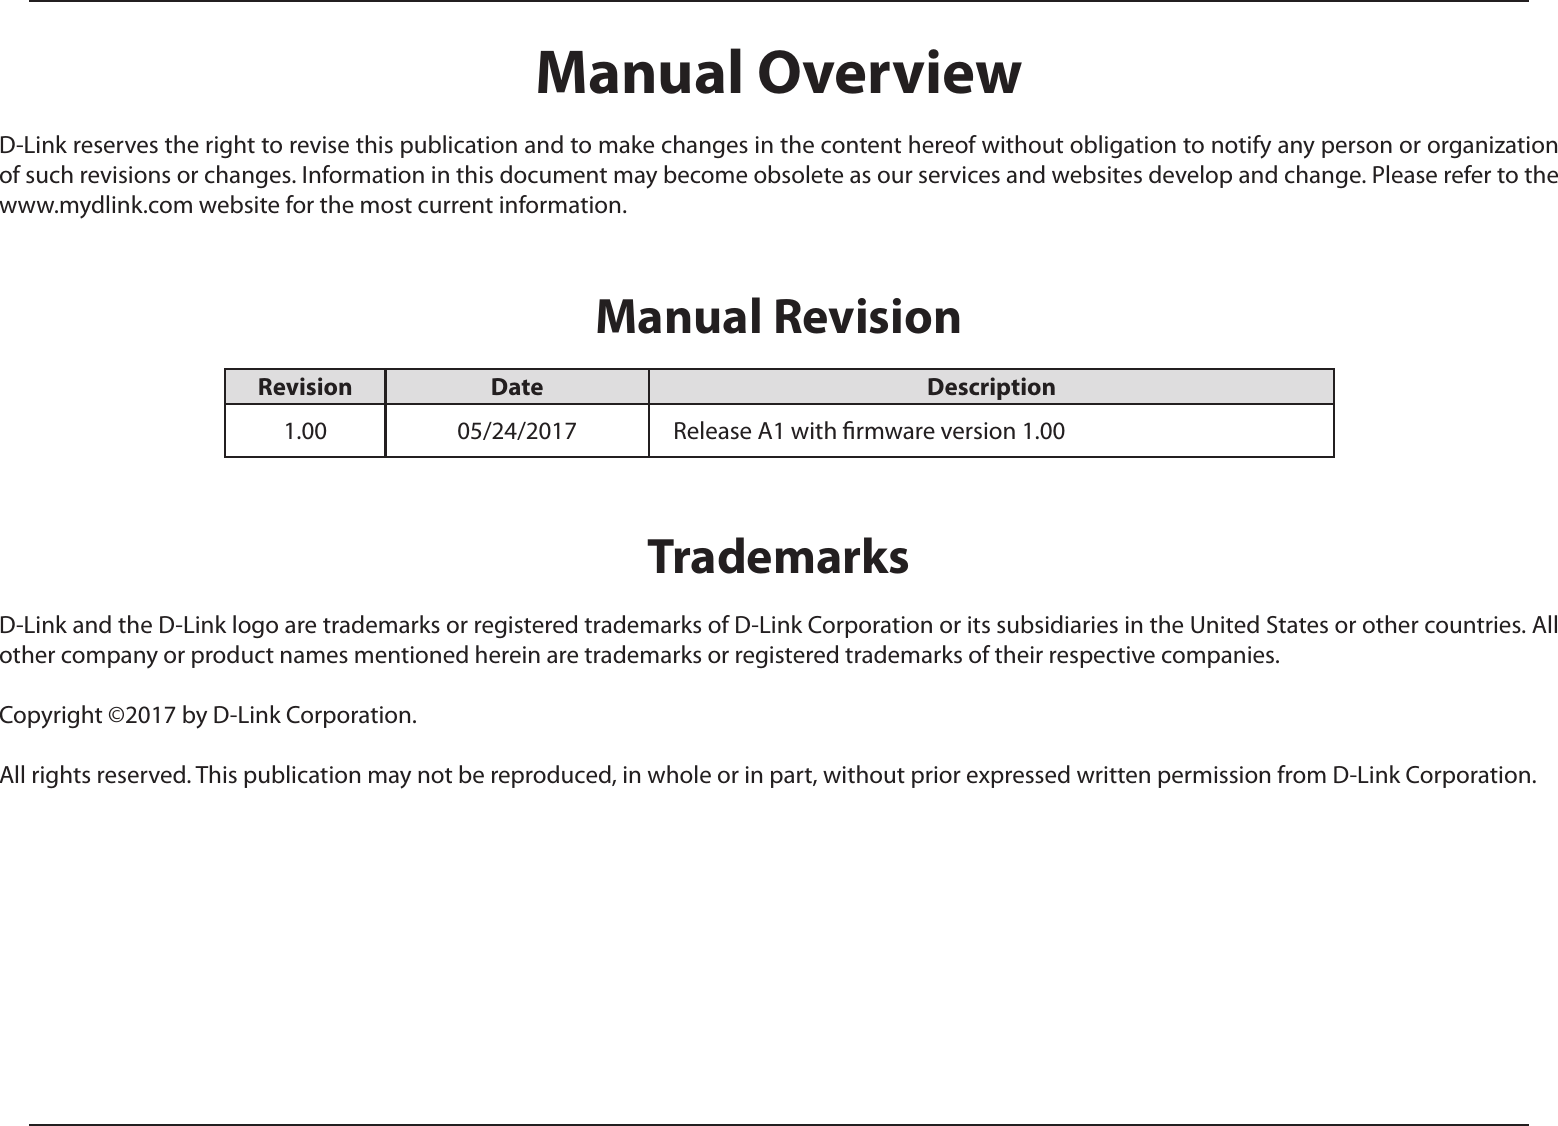 Manual OverviewD-Link reserves the right to revise this publication and to make changes in the content hereof without obligation to notify any person or organization of such revisions or changes. Information in this document may become obsolete as our services and websites develop and change. Please refer to the www.mydlink.com website for the most current information.Manual RevisionTrademarksD-Link and the D-Link logo are trademarks or registered trademarks of D-Link Corporation or its subsidiaries in the United States or other countries. All other company or product names mentioned herein are trademarks or registered trademarks of their respective companies.Copyright ©2017 by D-Link Corporation.All rights reserved. This publication may not be reproduced, in whole or in part, without prior expressed written permission from D-Link Corporation.Revision Date Description1.00 05/24/2017    Release A1 with rmware version 1.00